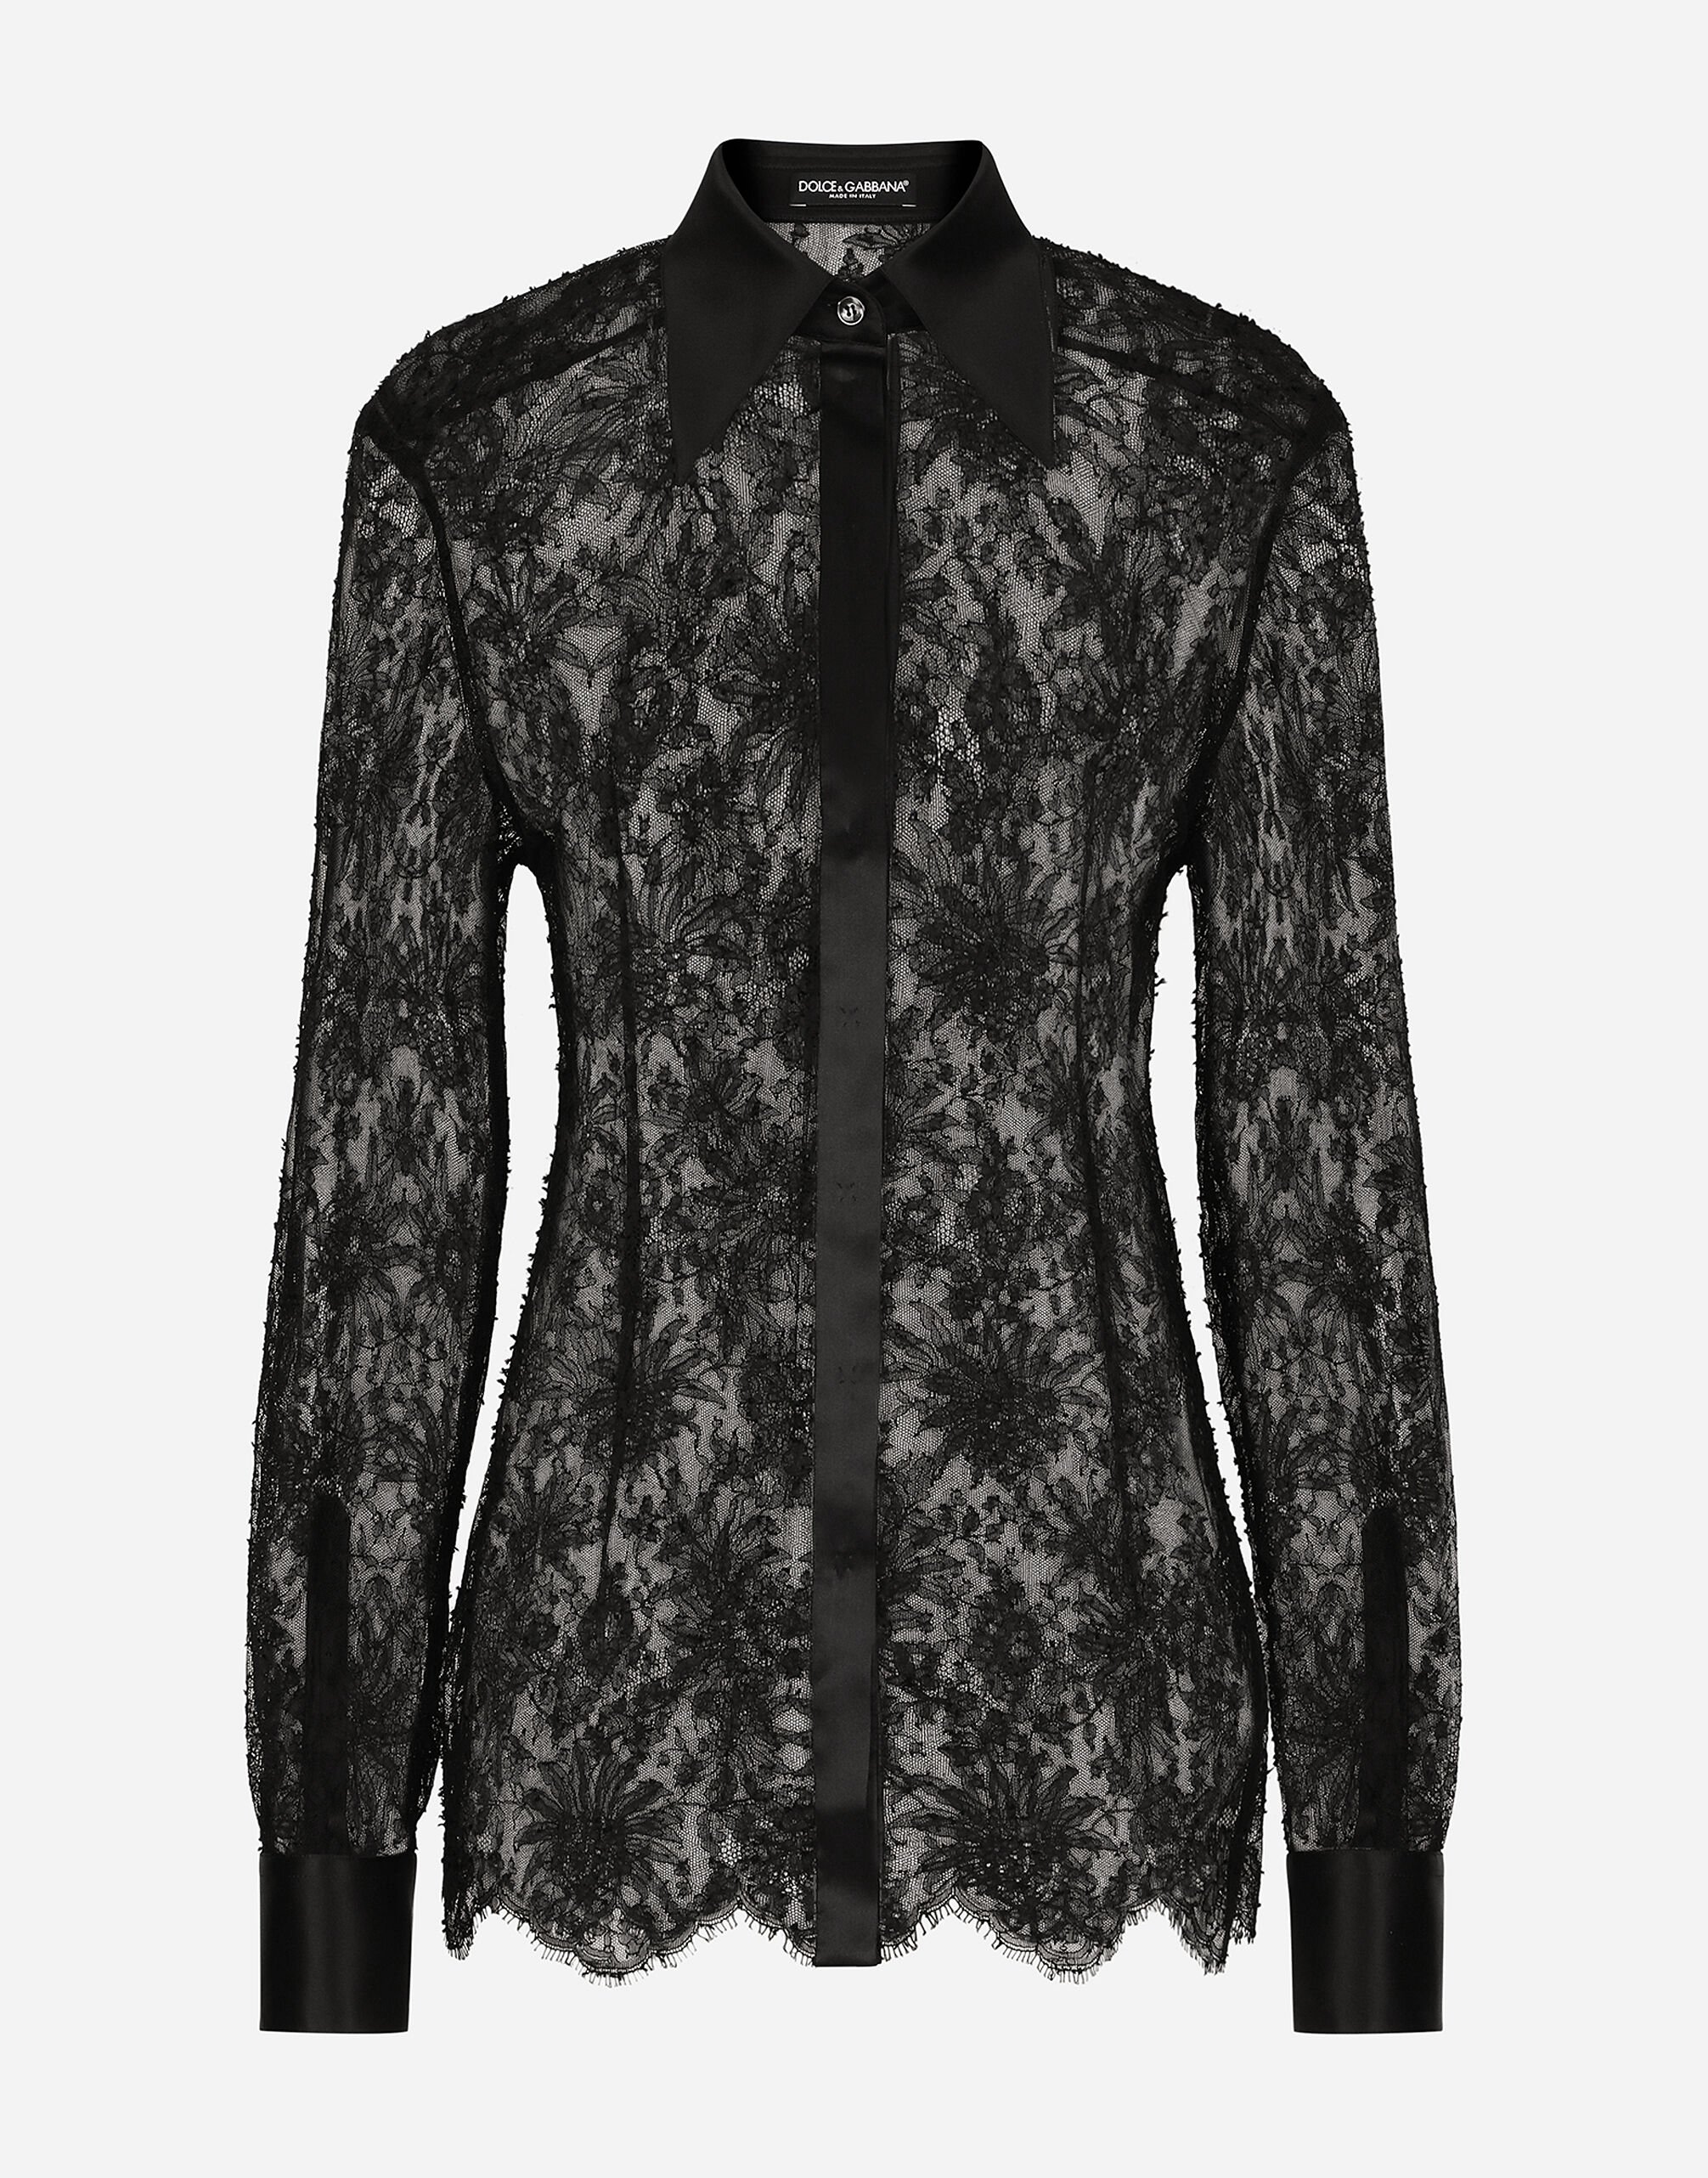 Dolce & Gabbana Chantilly lace shirt with satin details Black F7T19TG9798